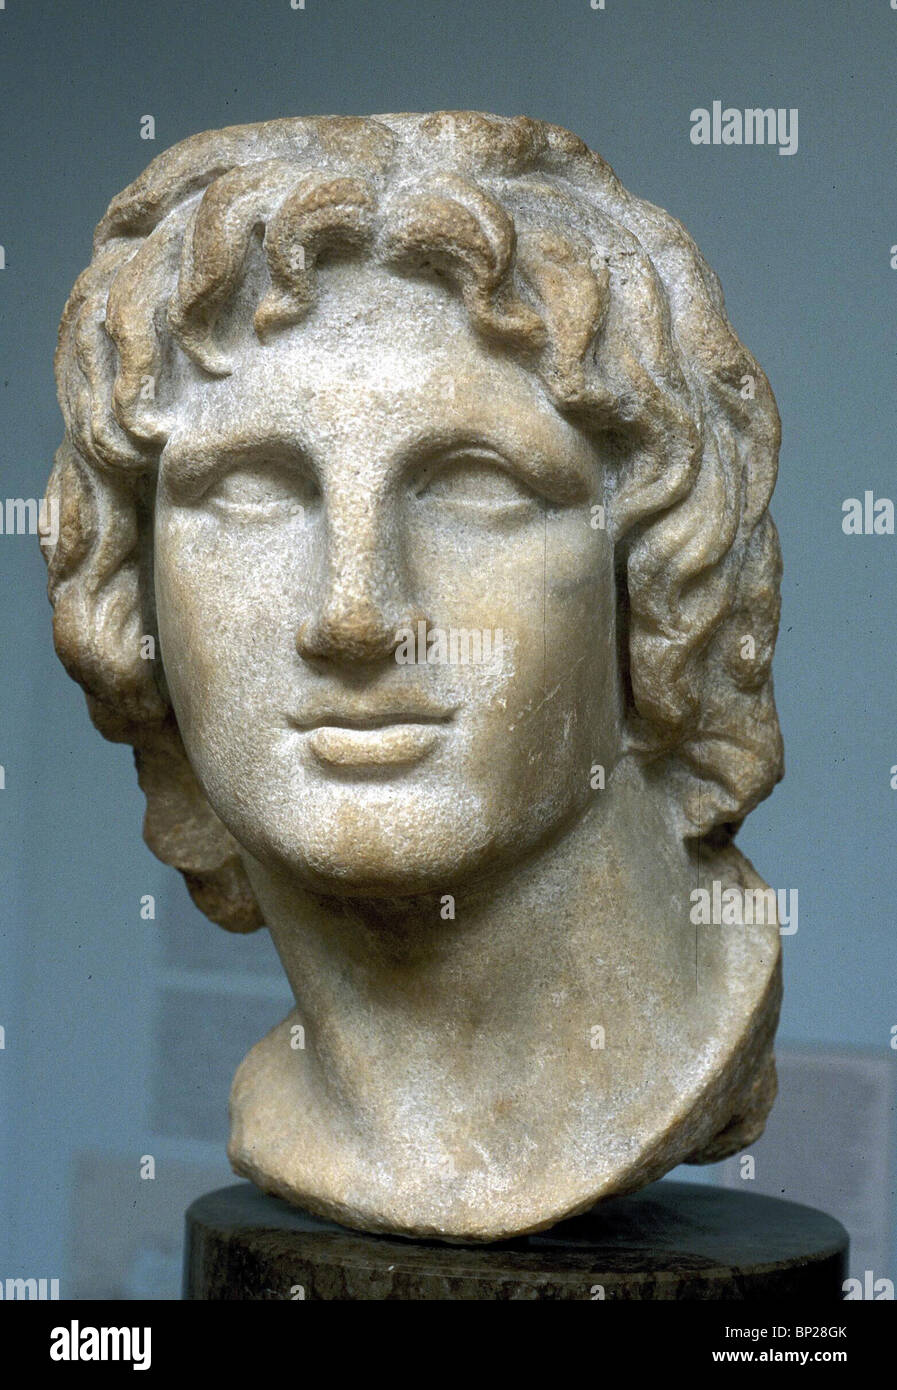 Bust of Alexander the Great, TOMASSO II, 2021